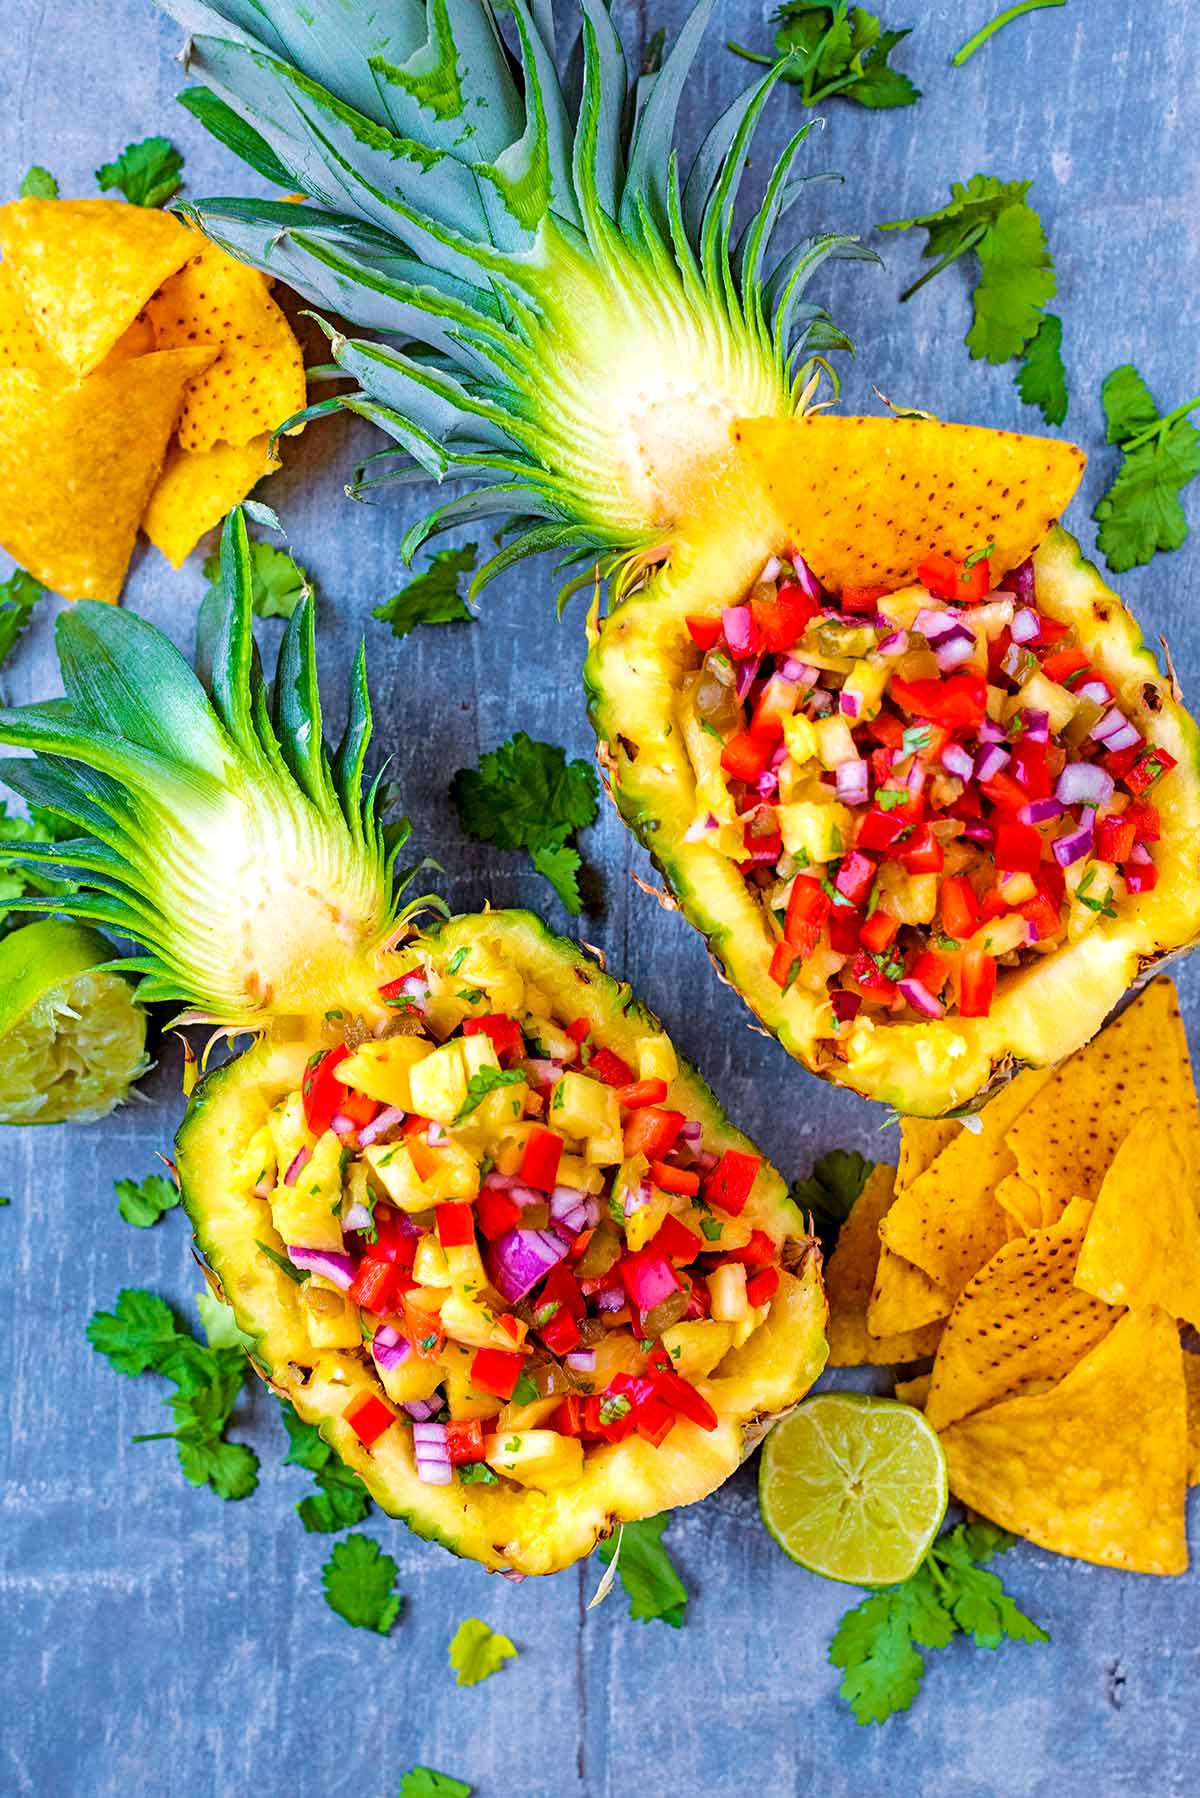 A pineapple sliced in half and filled with salsa. Tortilla chips are scattered around.